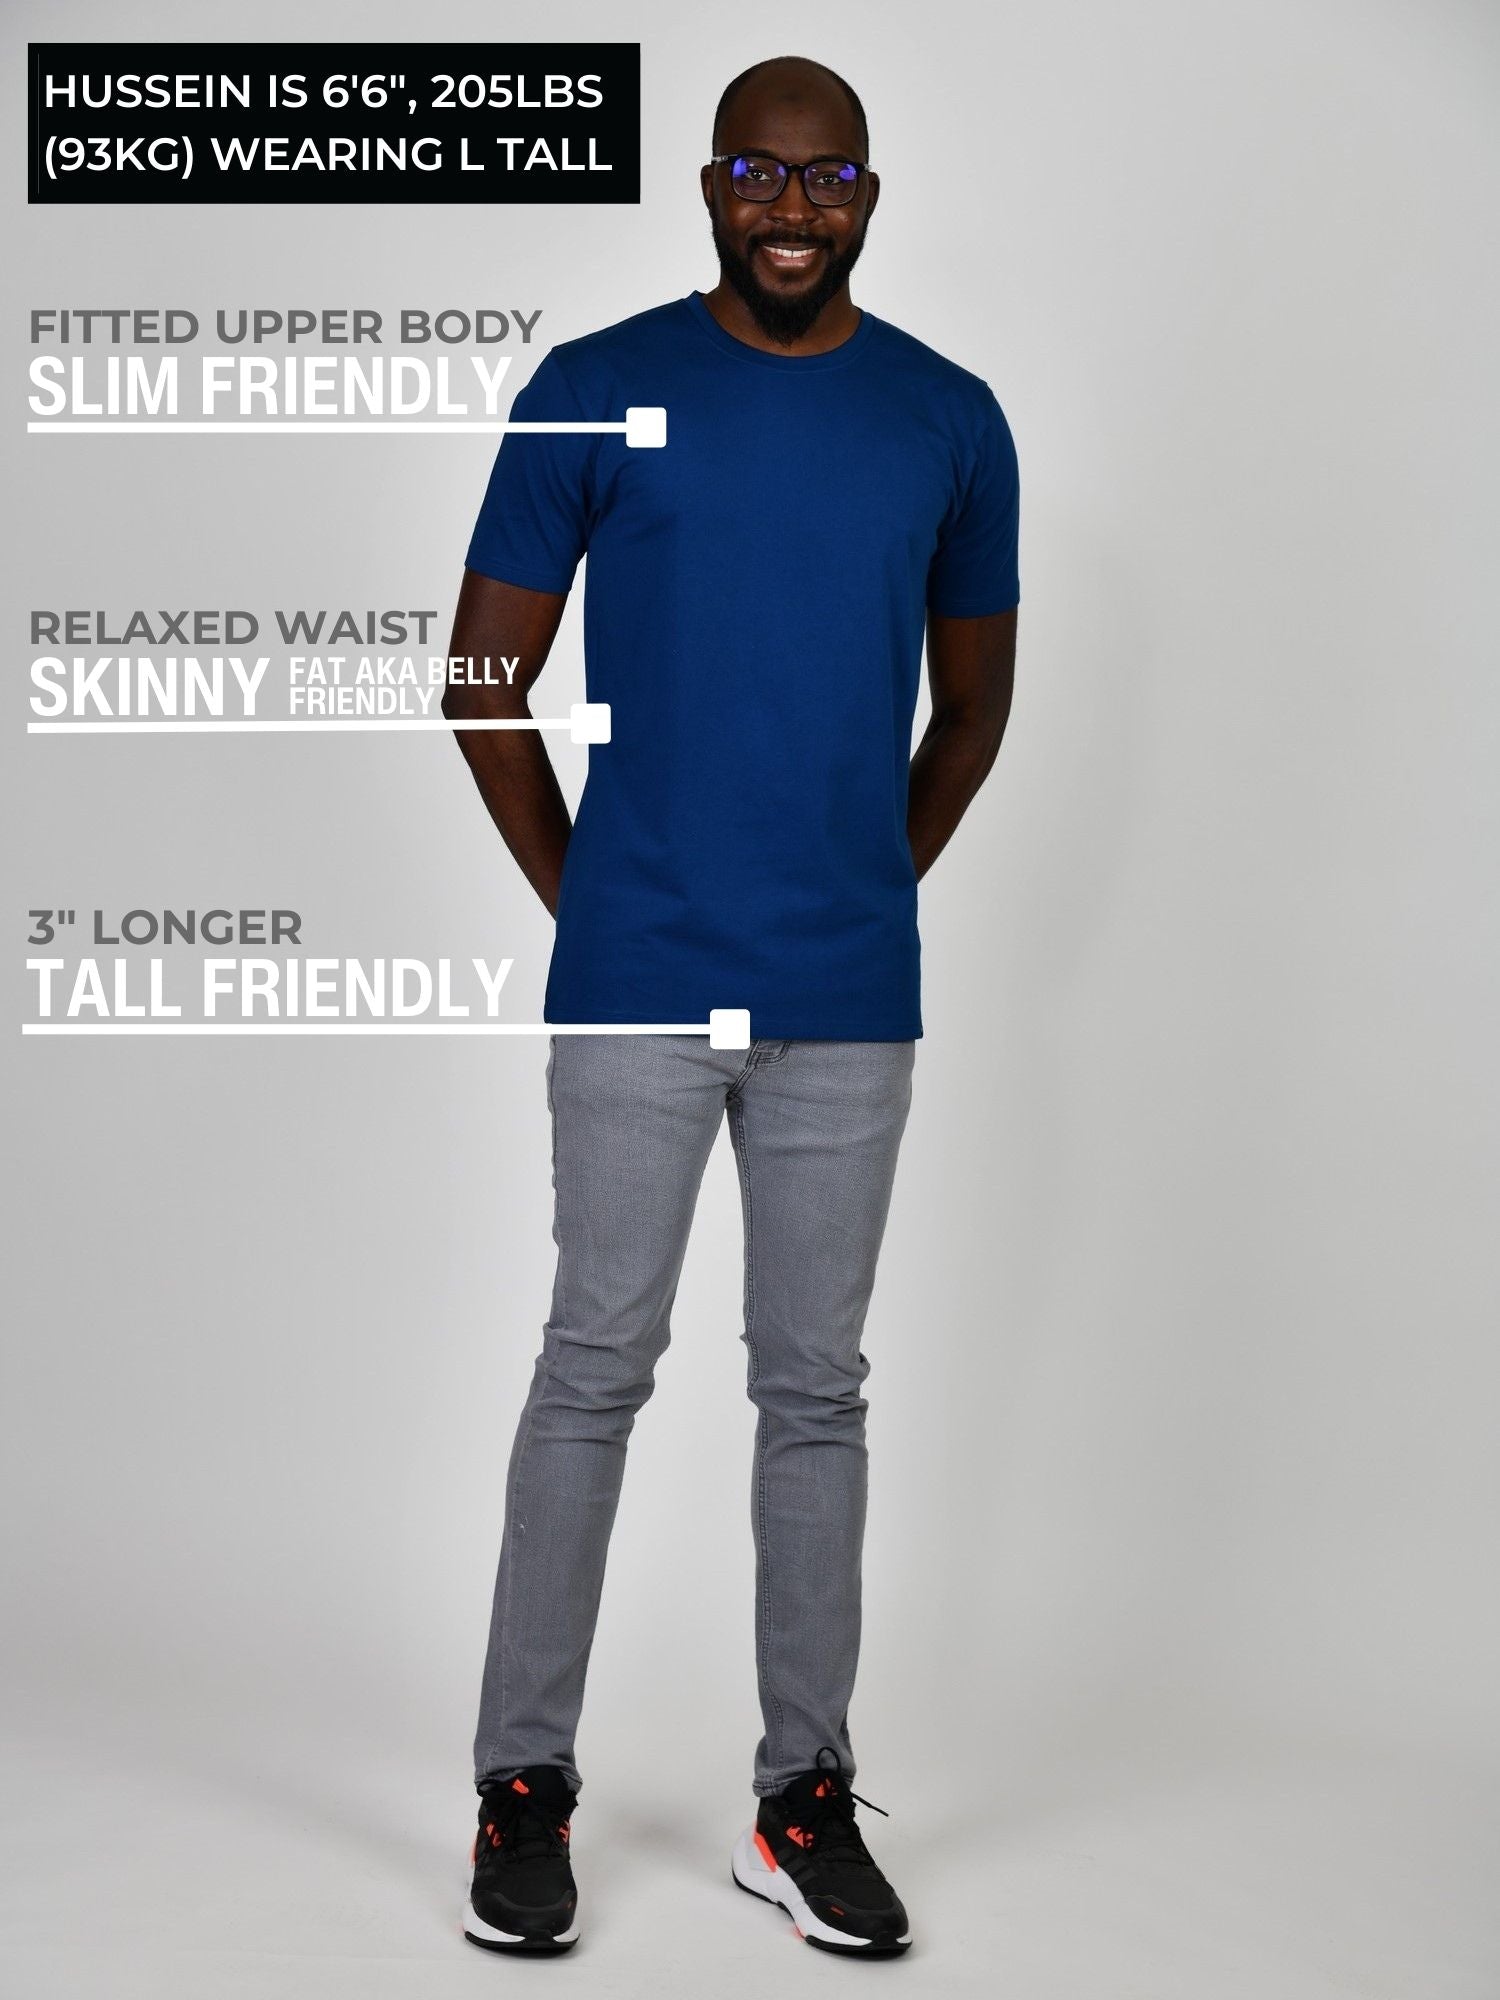 A head to toe shot of a tall athletic guy wearing a navy blue large tall t-shirt.